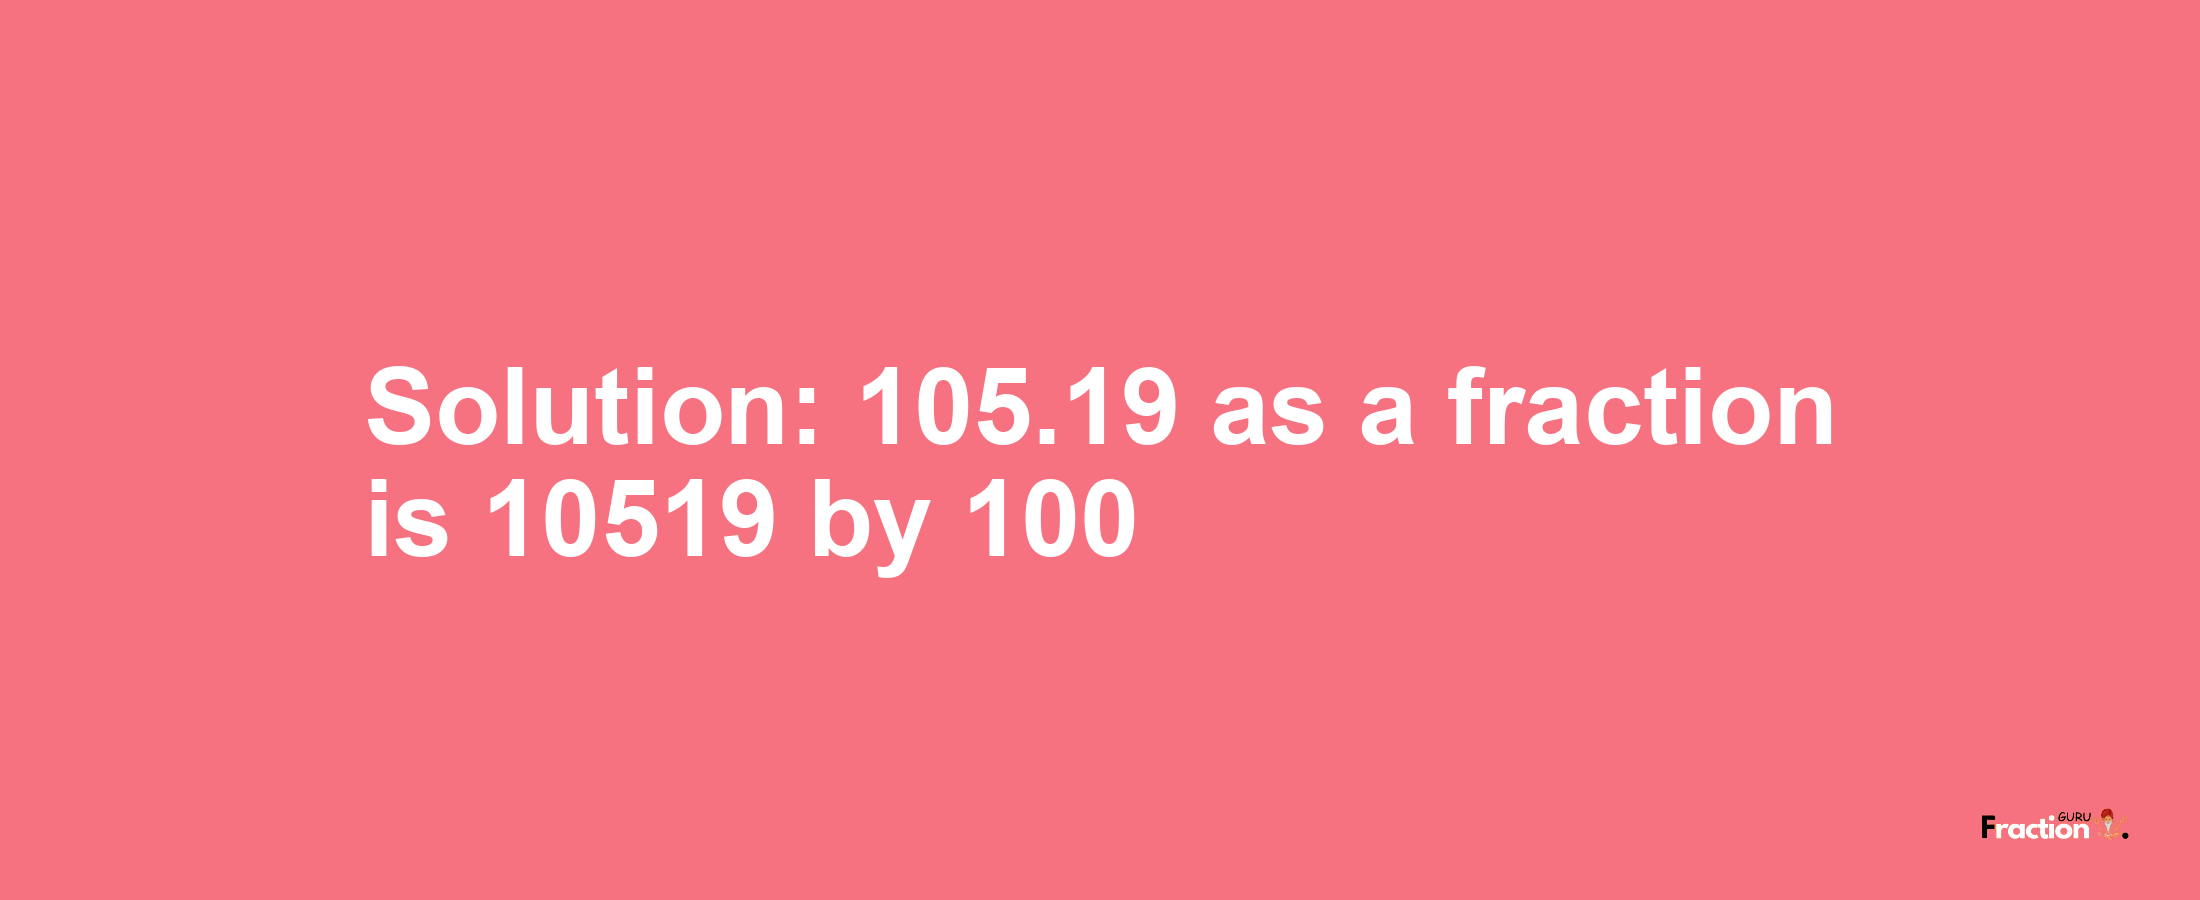 Solution:105.19 as a fraction is 10519/100